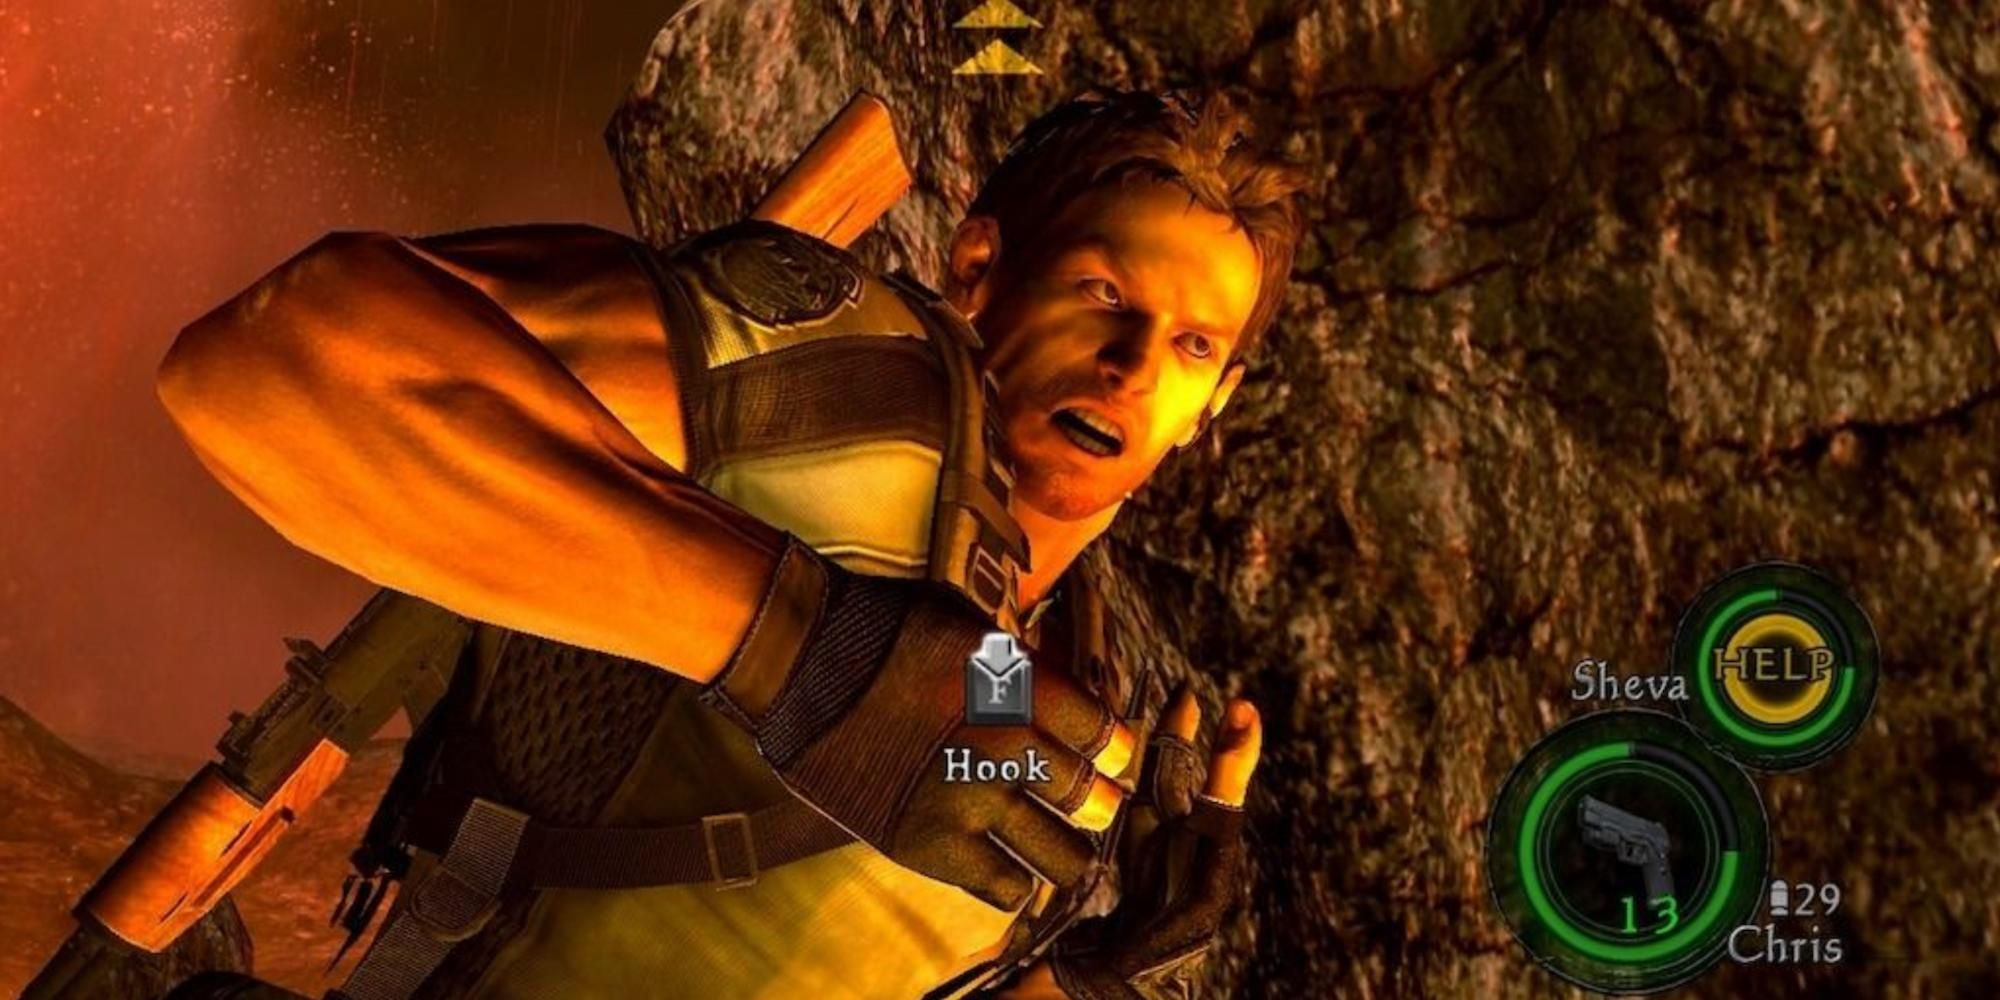 Chris Redfield punches a boulder in Resident Evil 5